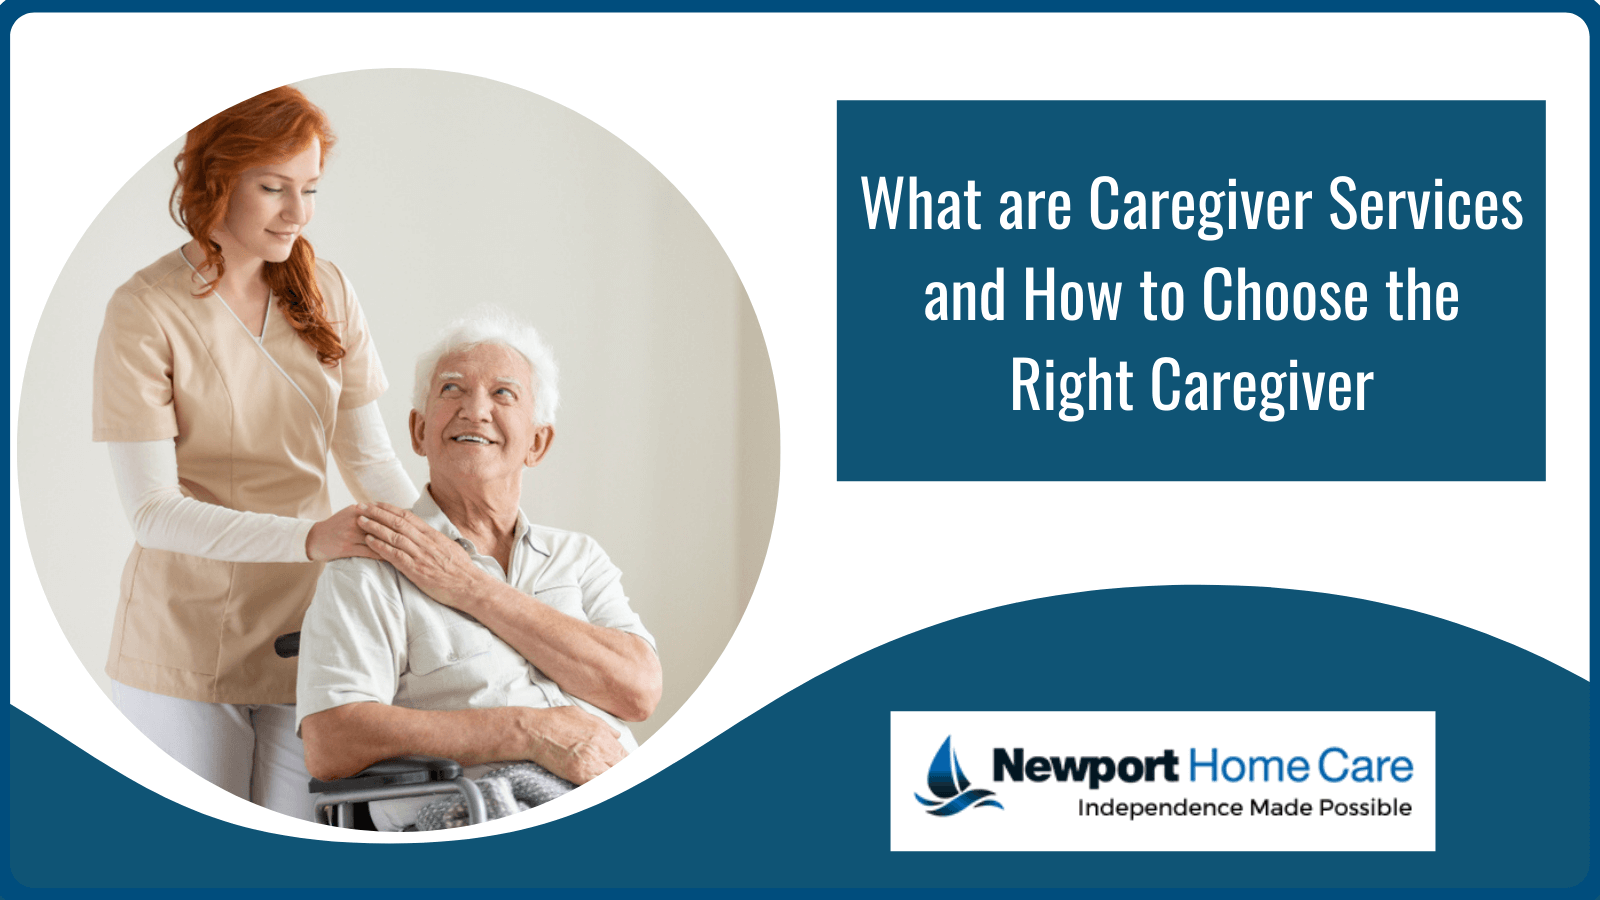 What are Caregiver Services and How to Choose the Right Caregiver